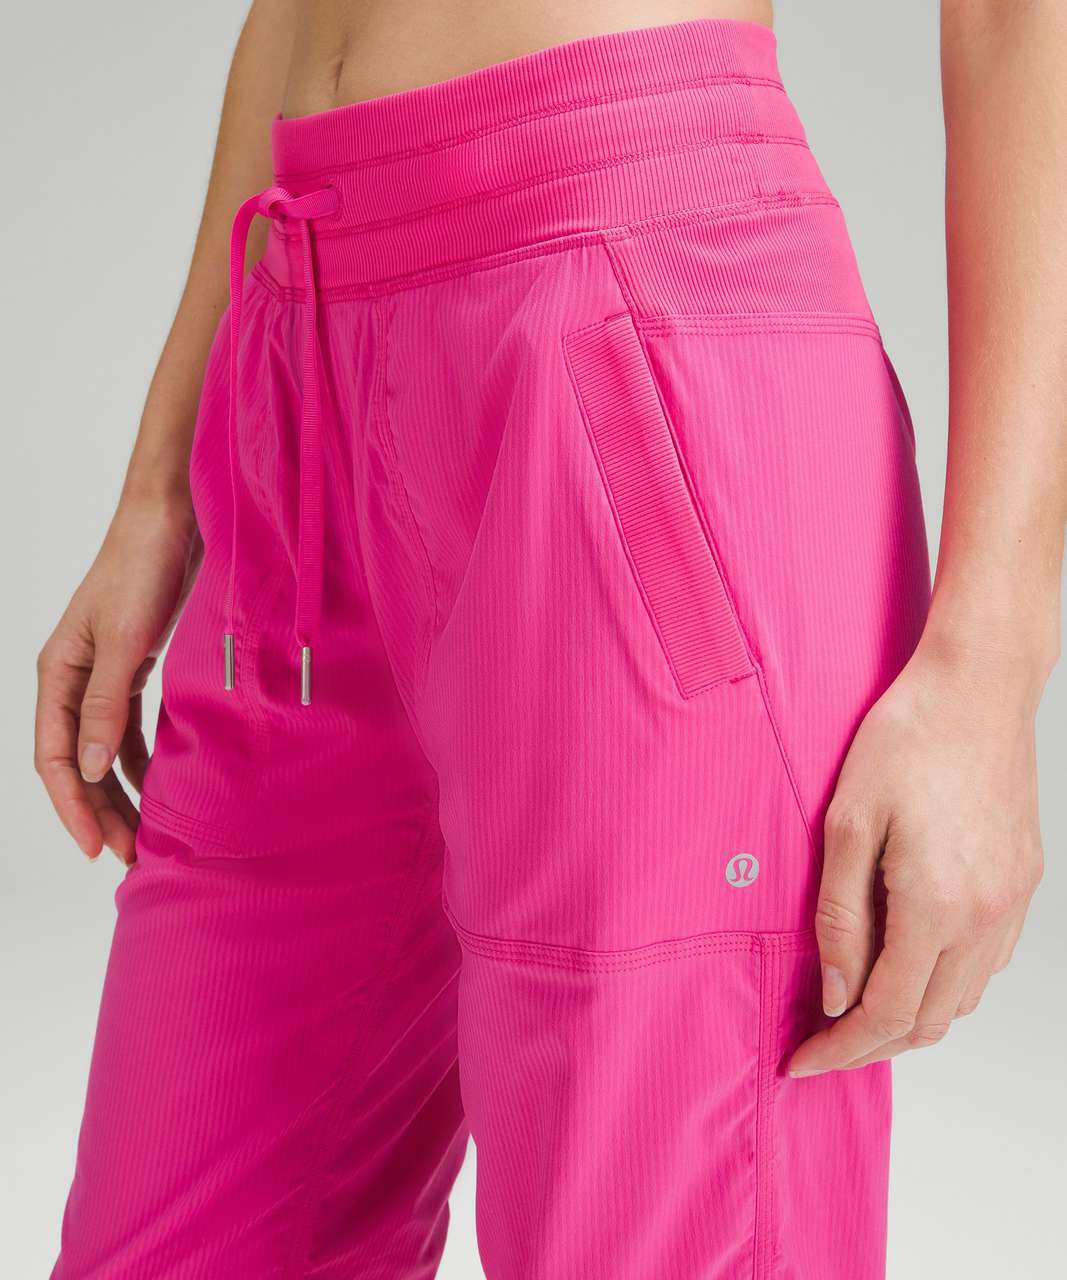 ☆ SOLD! ☆ LULULEMON rare sonic pink dance studio mid-rise full length pants.  Brand new never worn with tags still attached. Sold out.